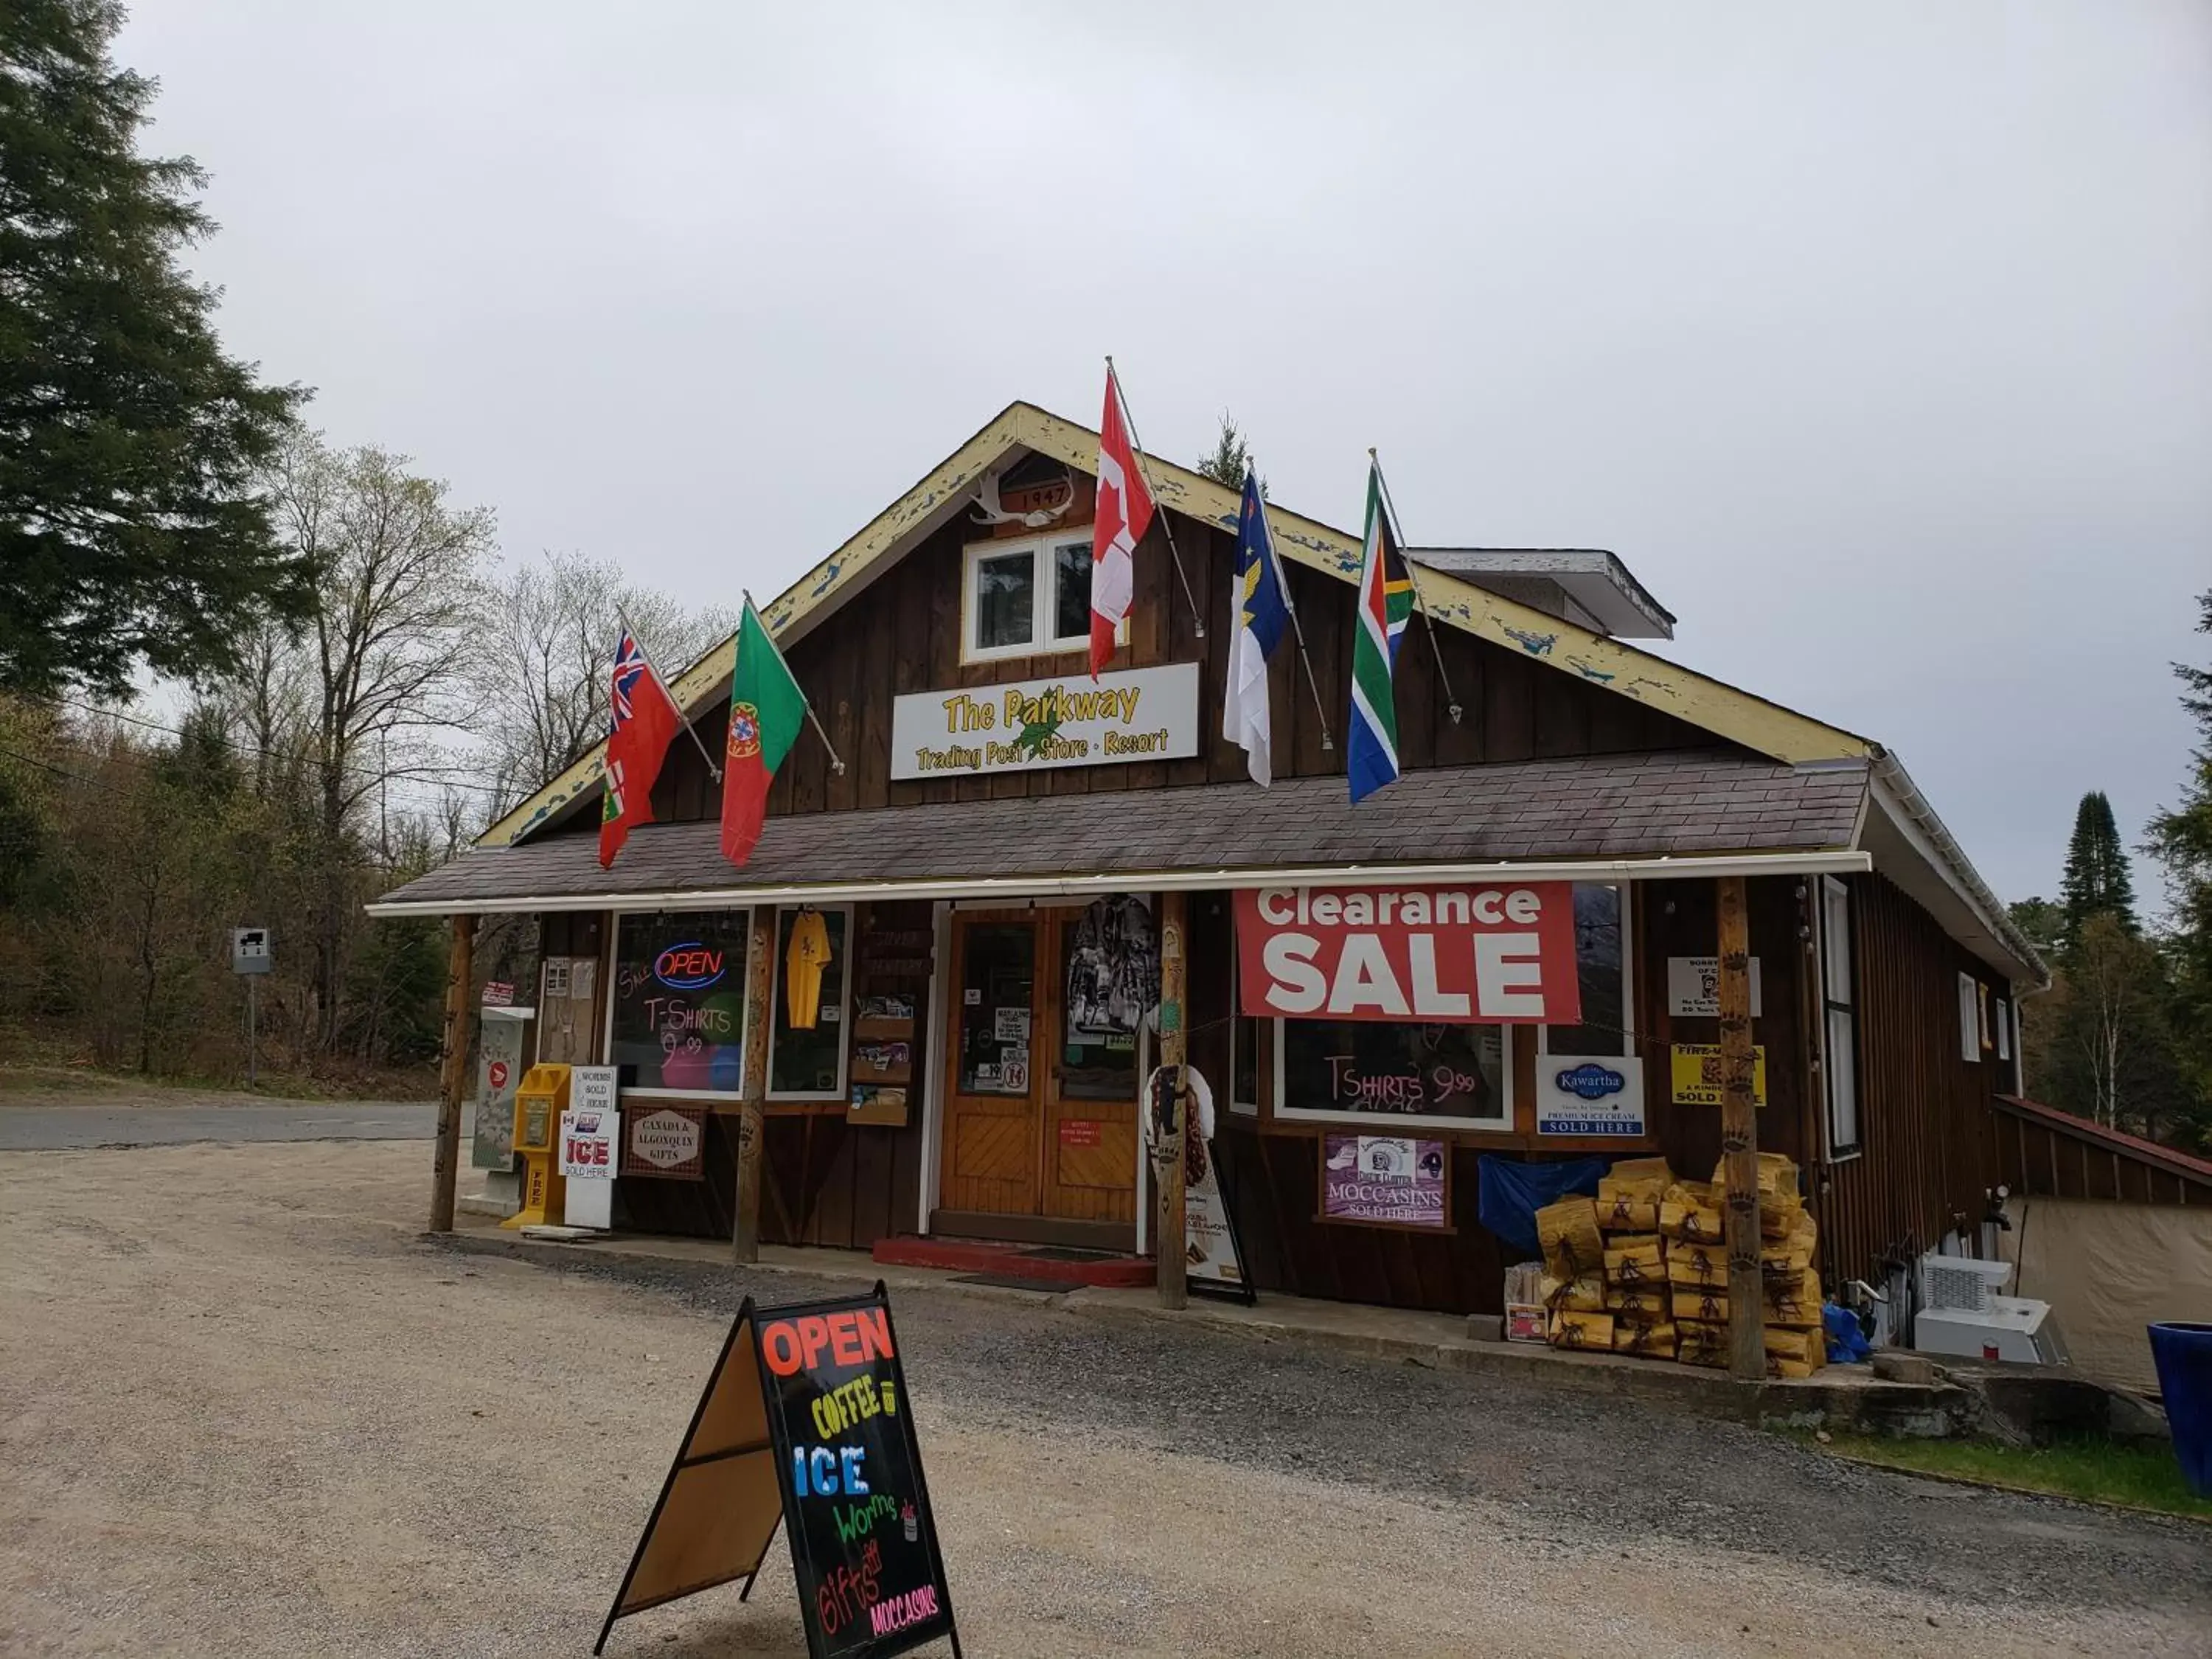 On-site shops, Property Building in Parkway Cottage Resort and Trading Post